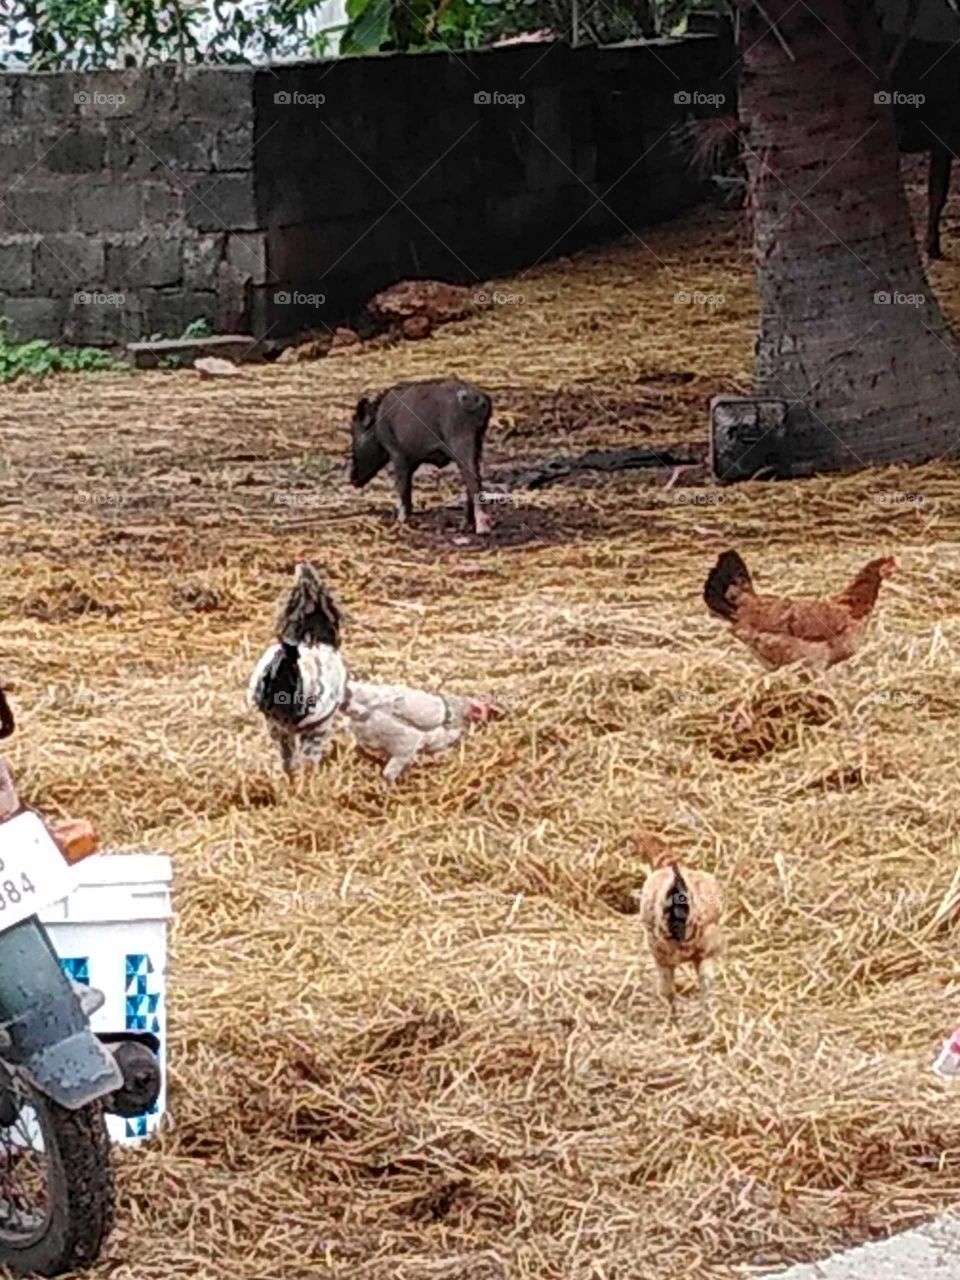 country chickens and a pig feeding on the grass